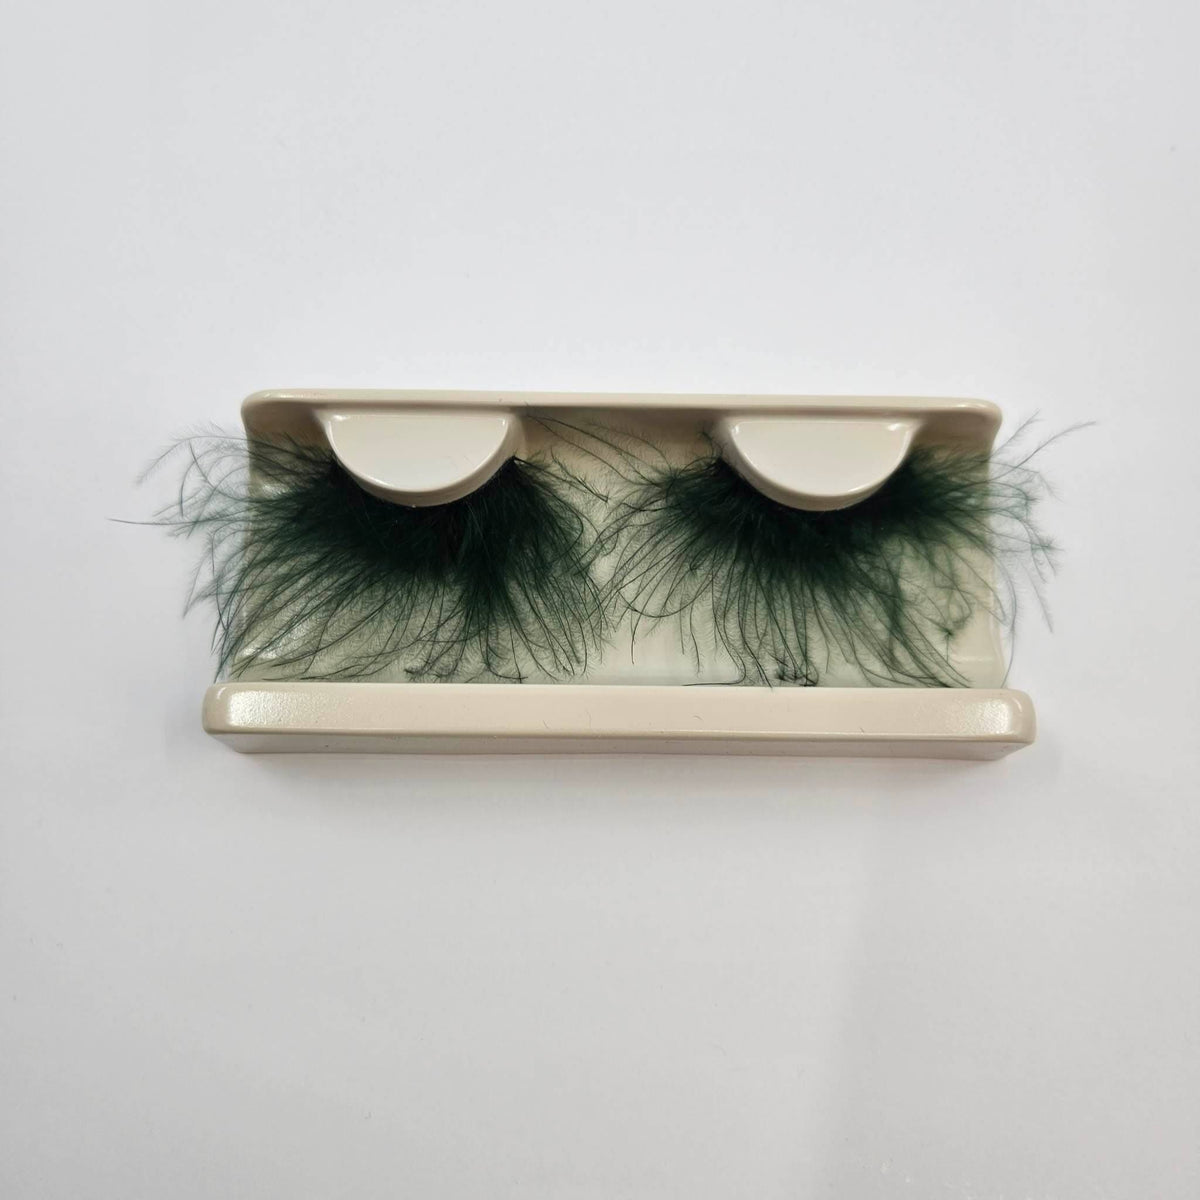 Floating Feather Dark Green Lashes